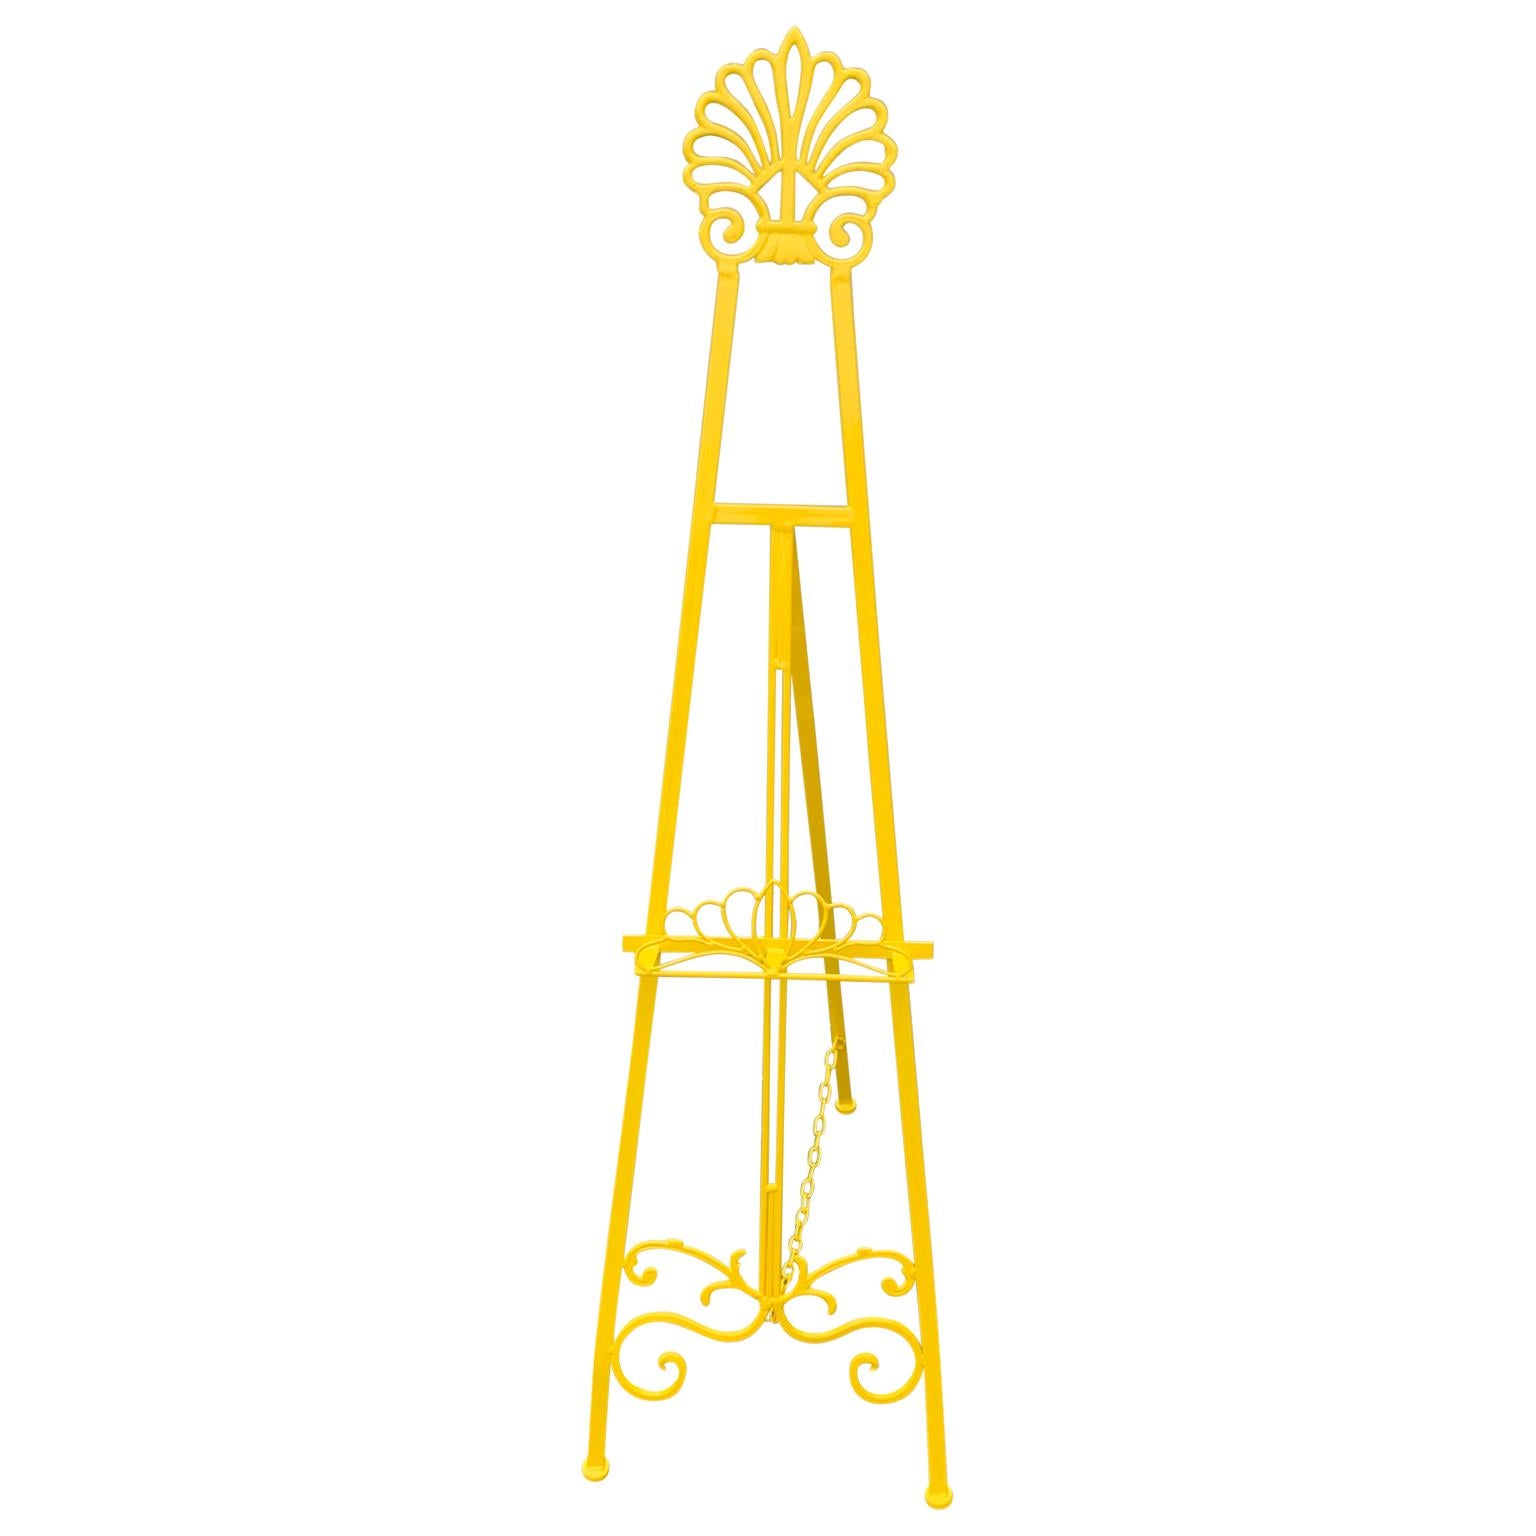 Modern Mid-Century Metal Easel, Newly Powder-Coated In Bright Sunshine Yellow